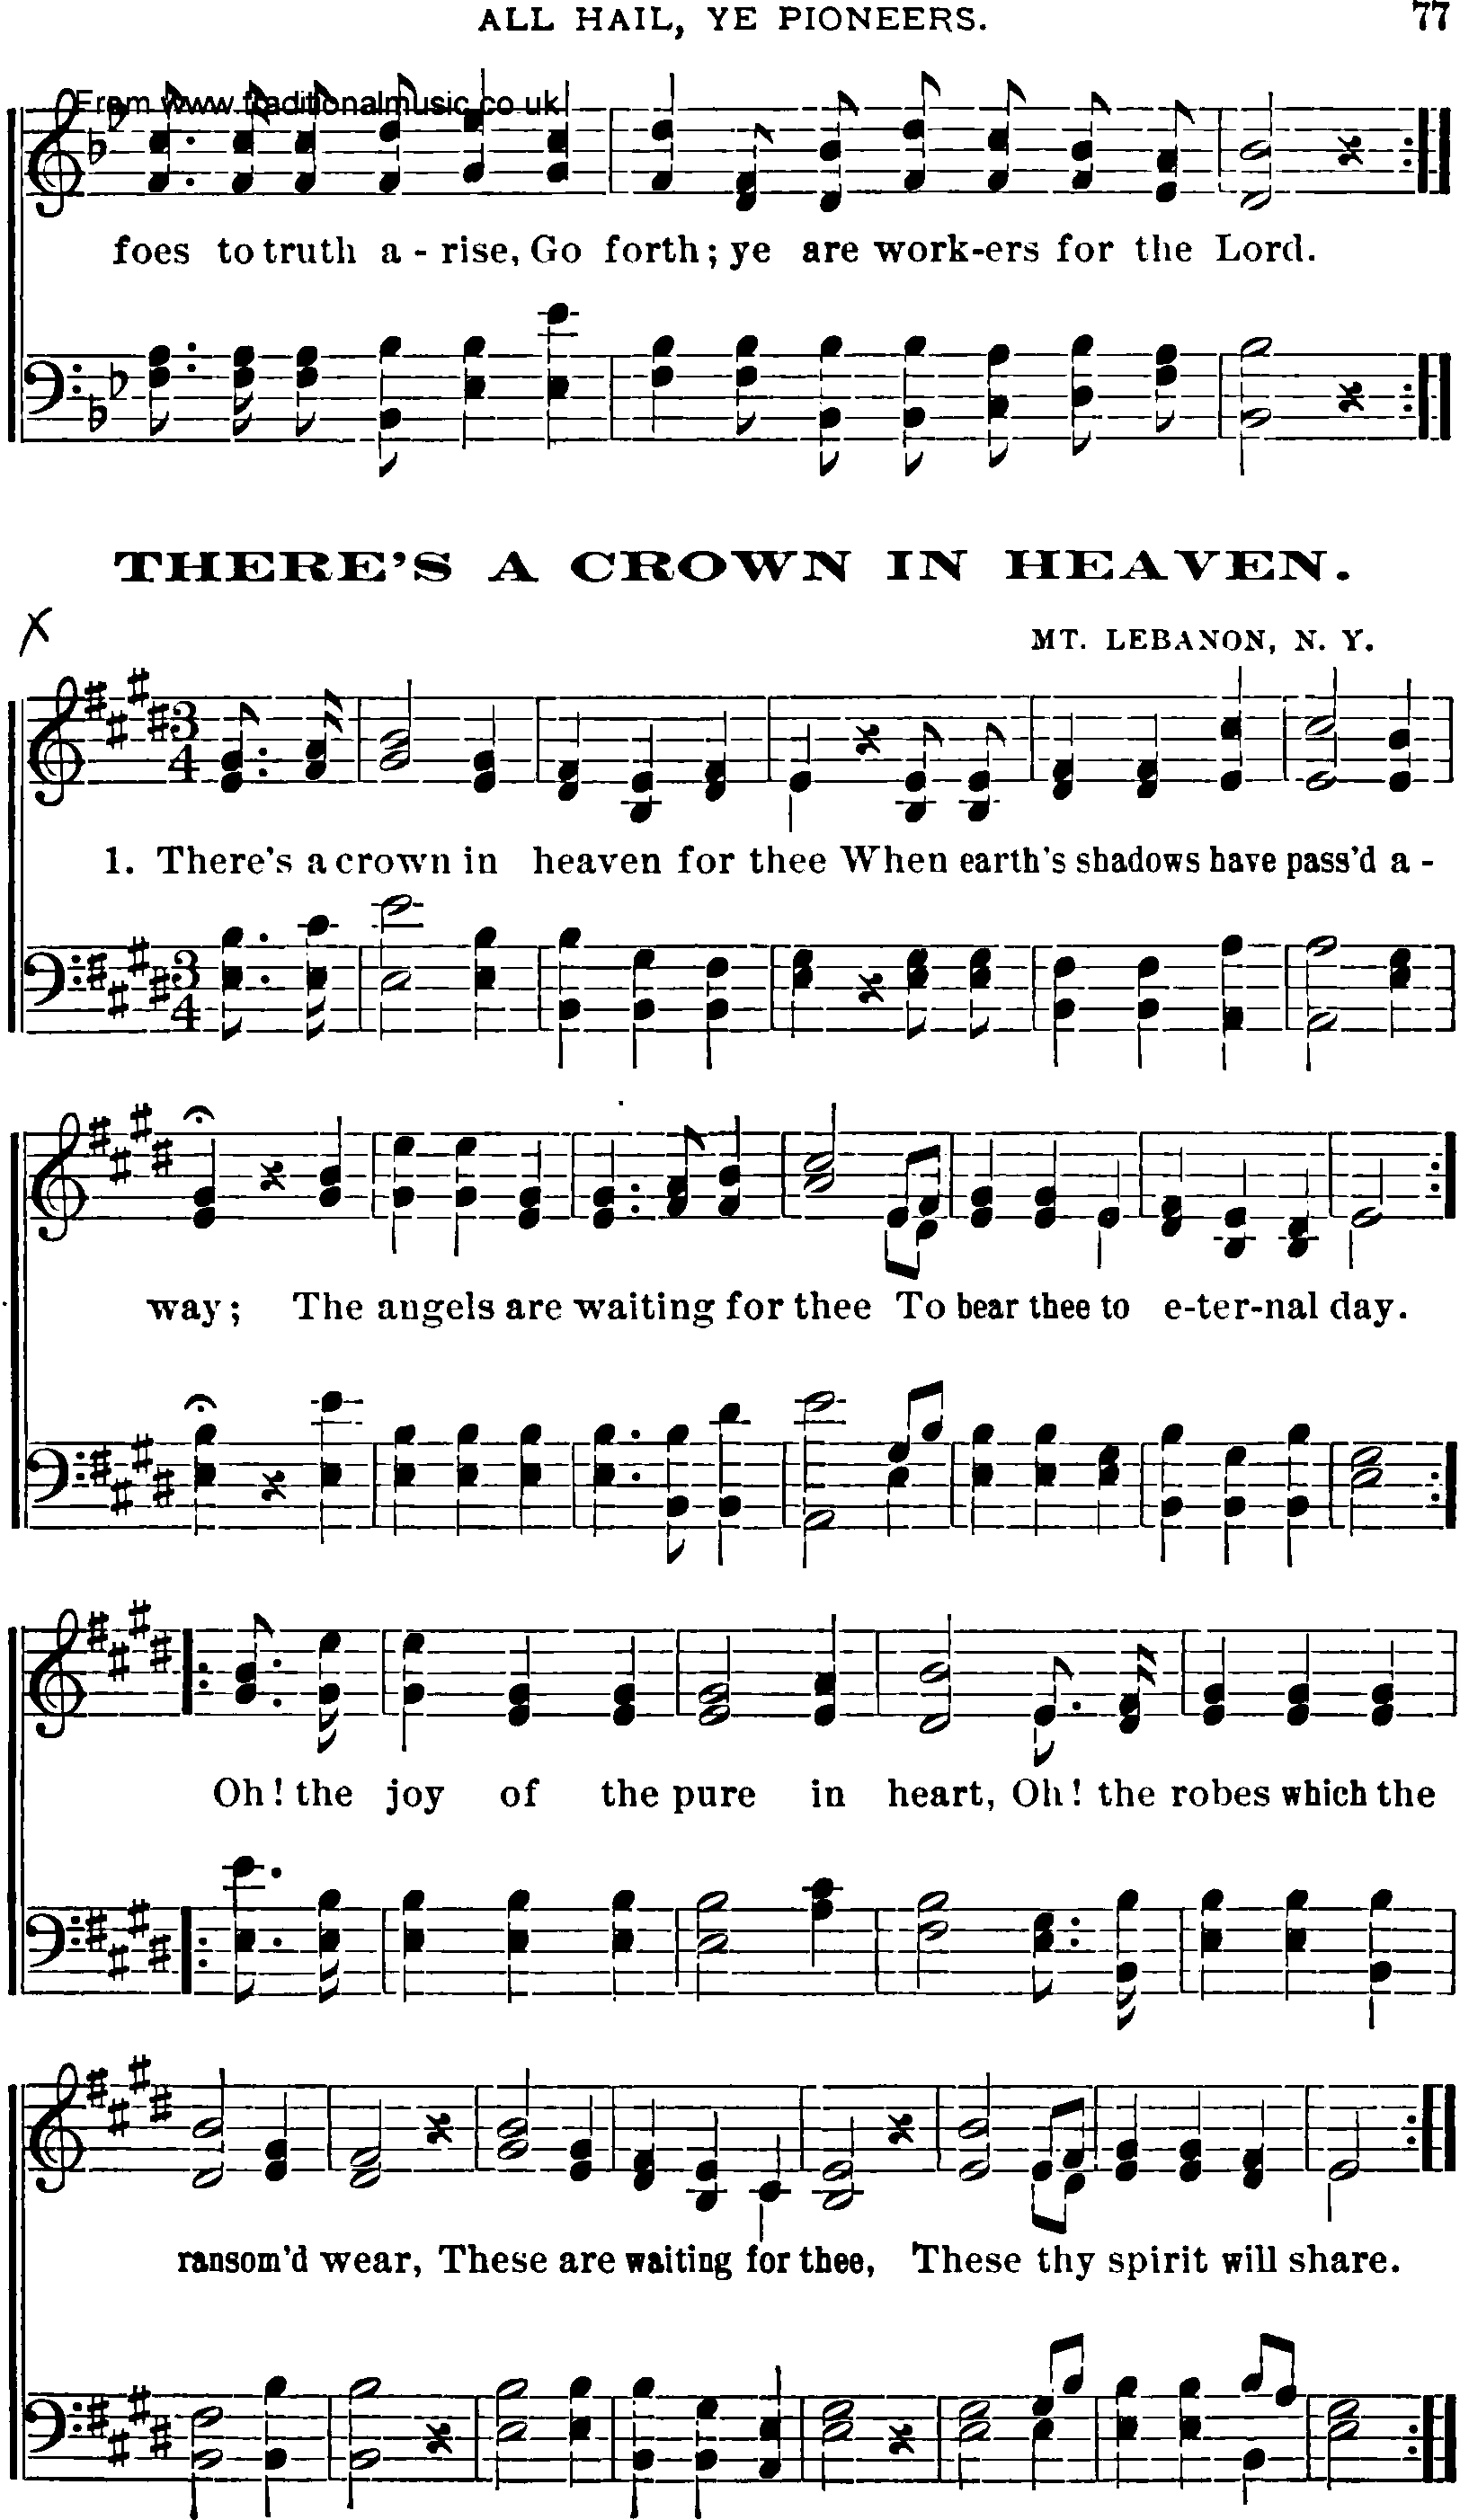 Shaker Music collection, Hymn: there's a crown in heaven, sheetmusic and PDF